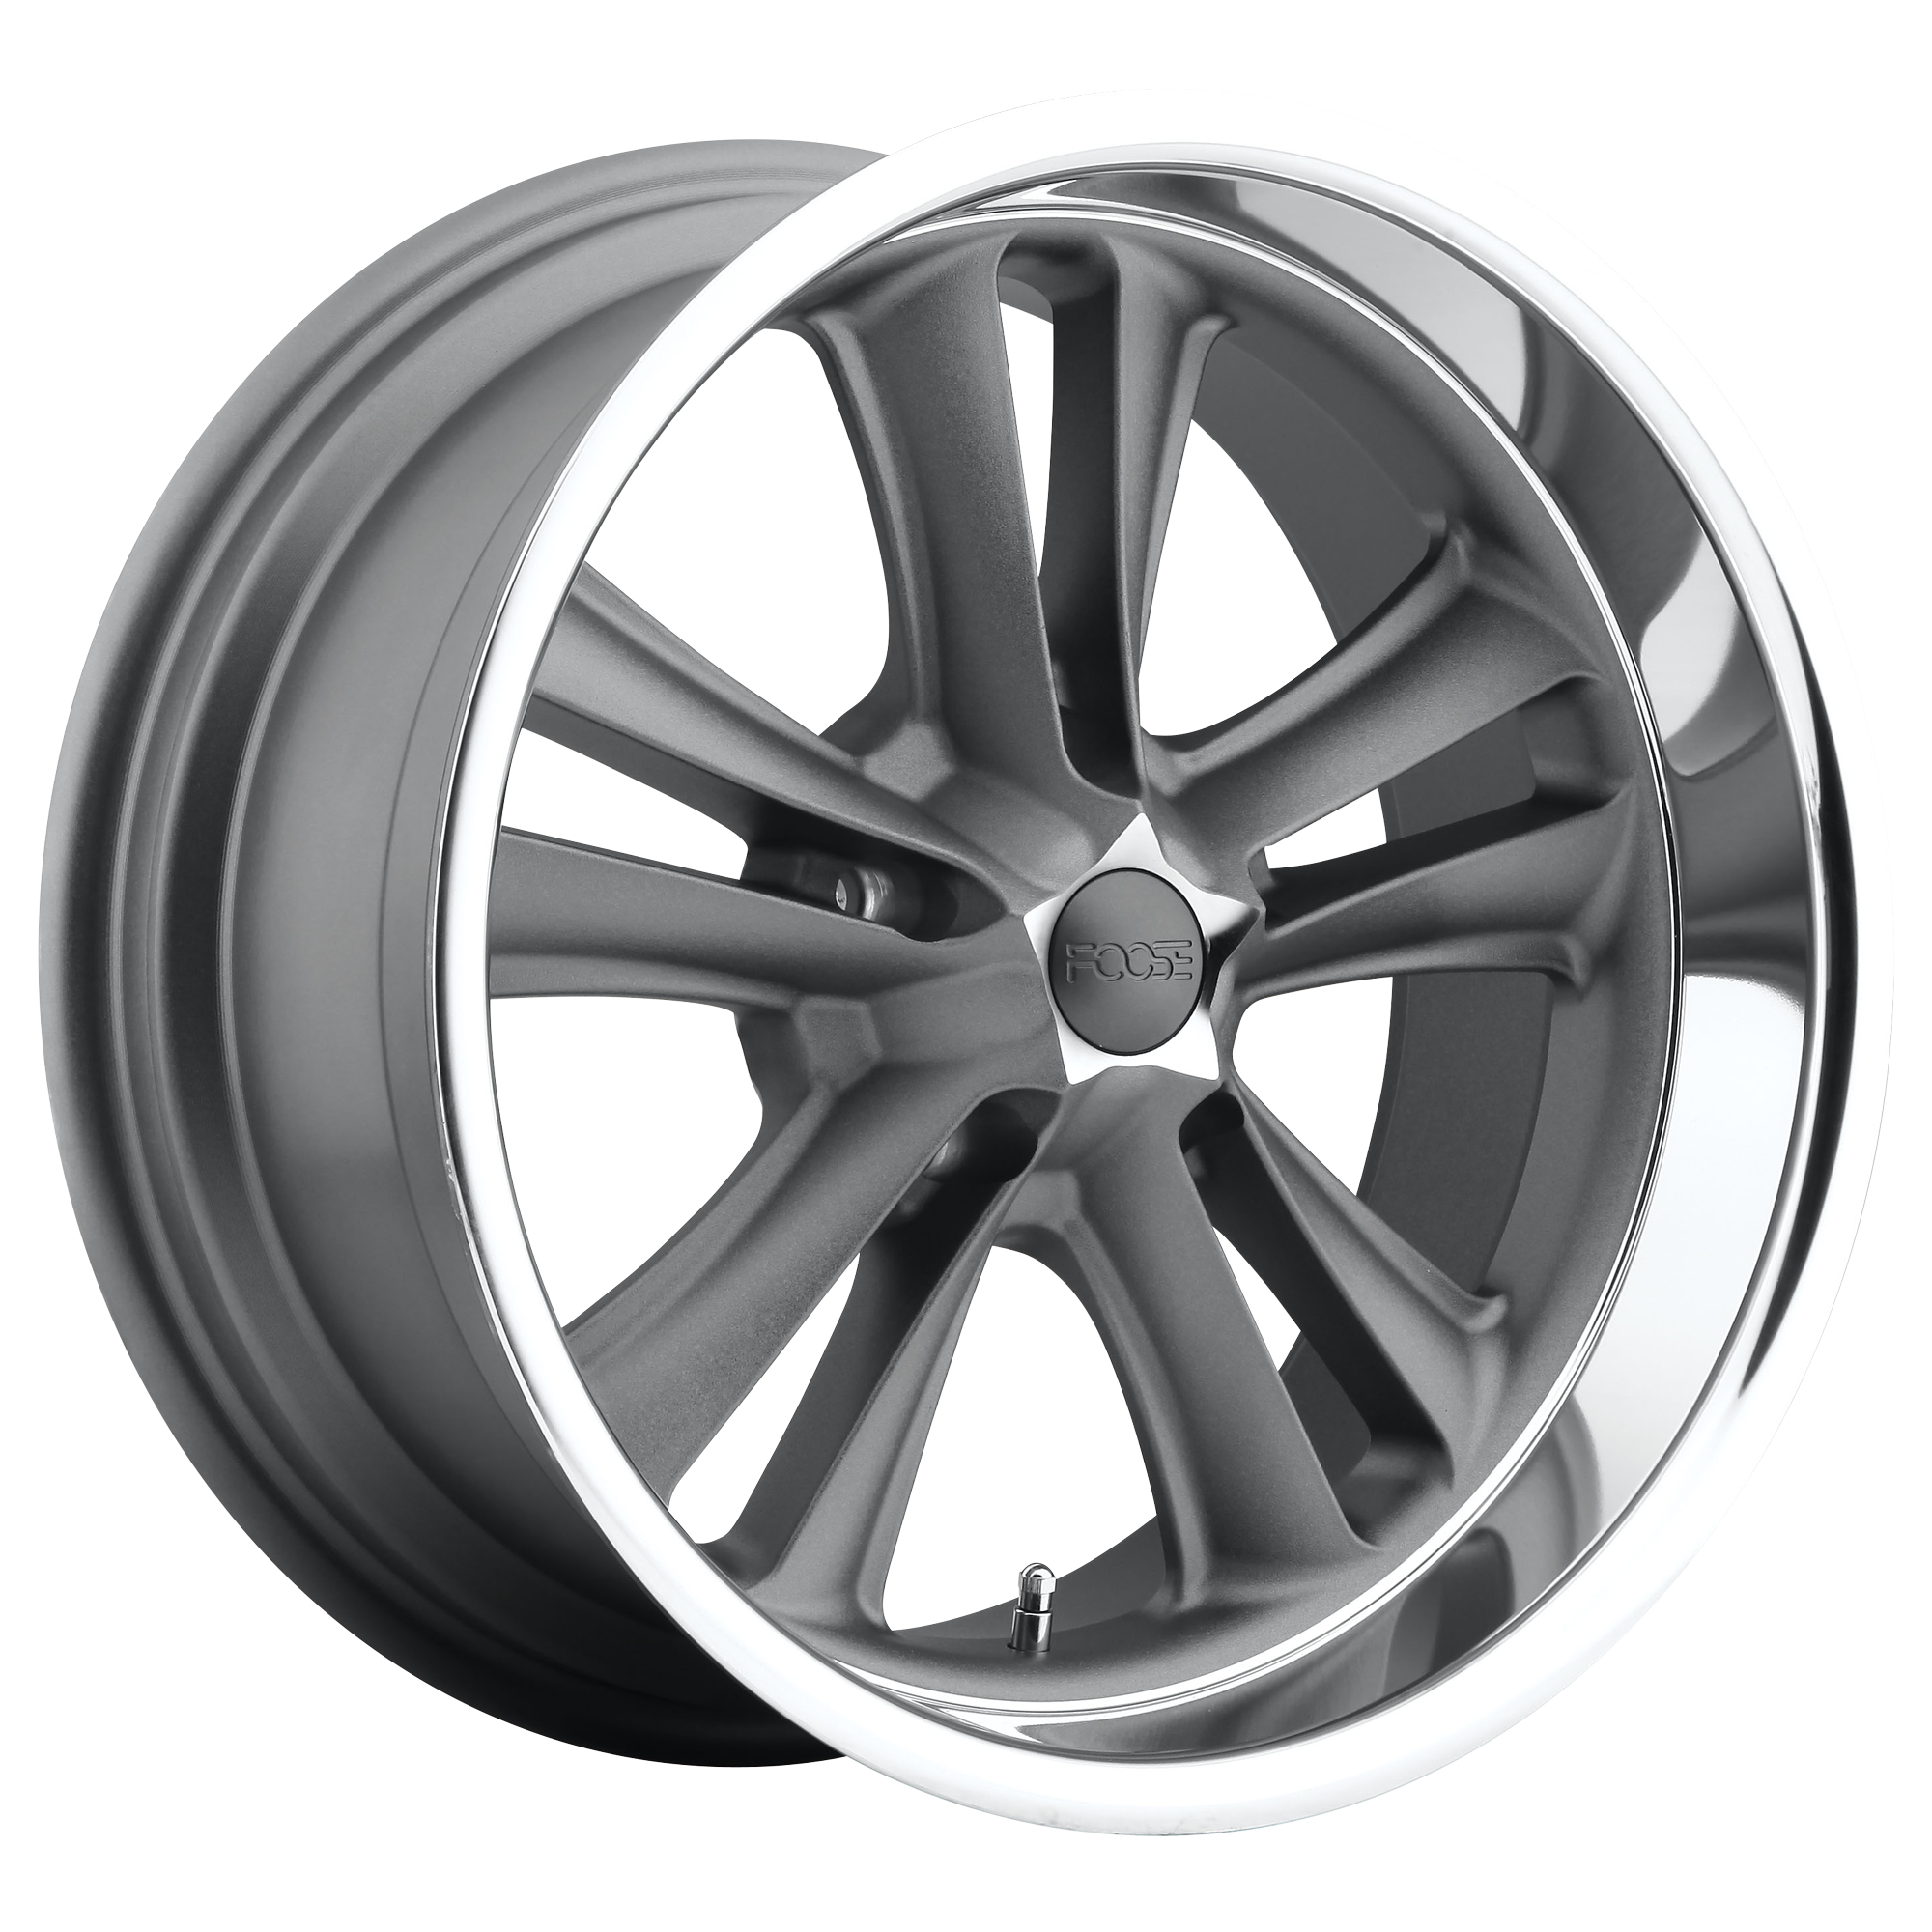 KNUCKLE 17x8 5x120.65 MATTE GUN METAL MACHINED (1 mm) - Tires and Engine Performance